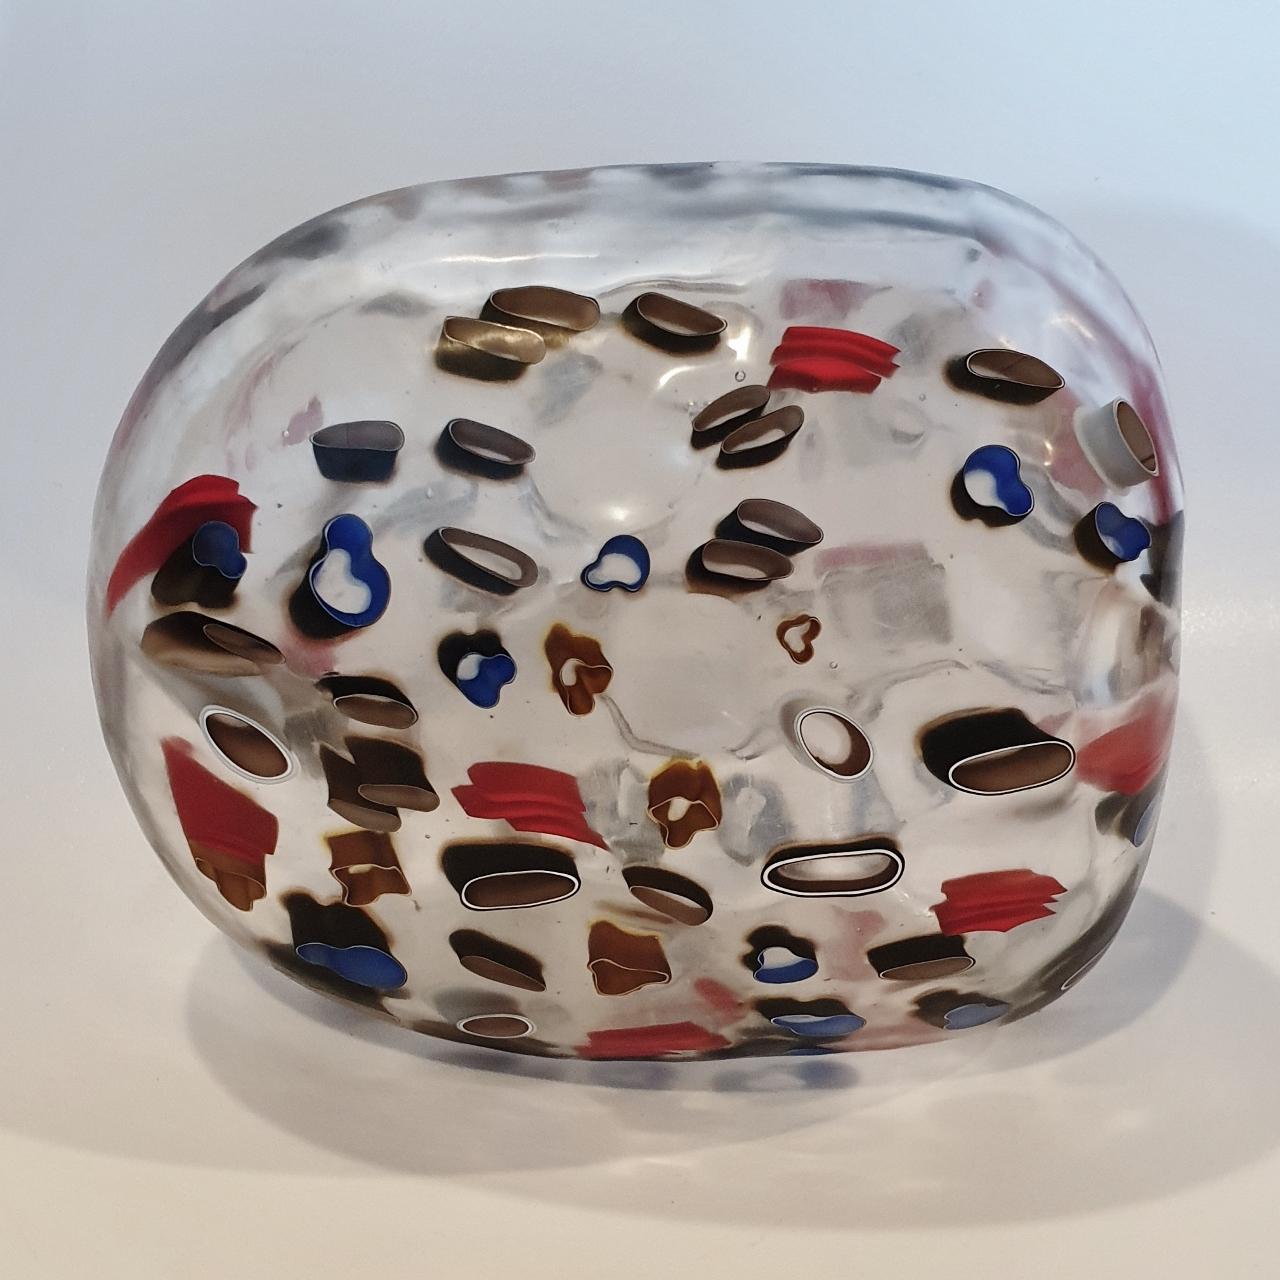 There is everything and nothing - contemporary modern abstract glass sculpture